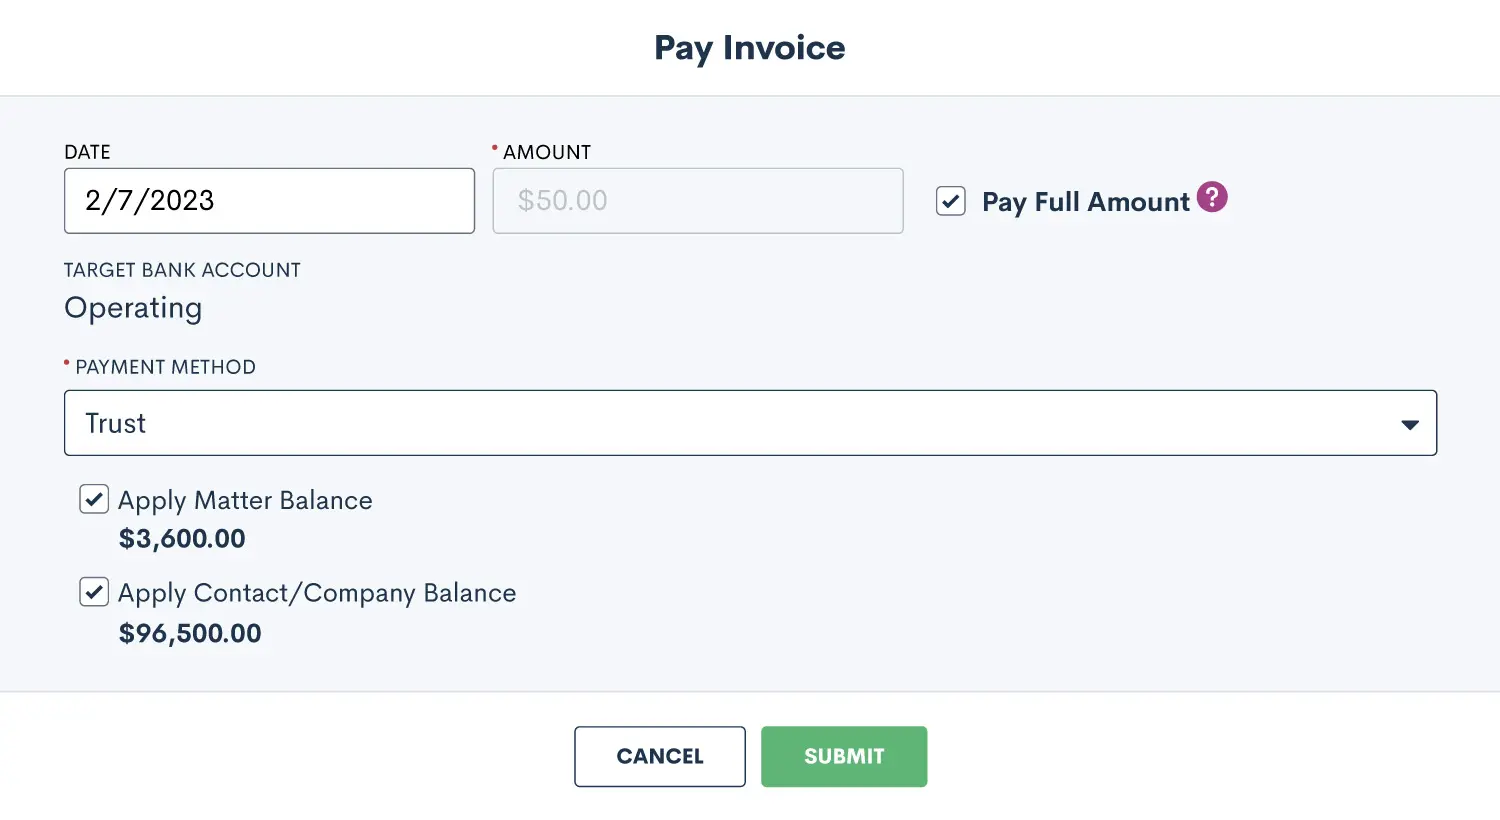 Pay Invoice From Trust Account